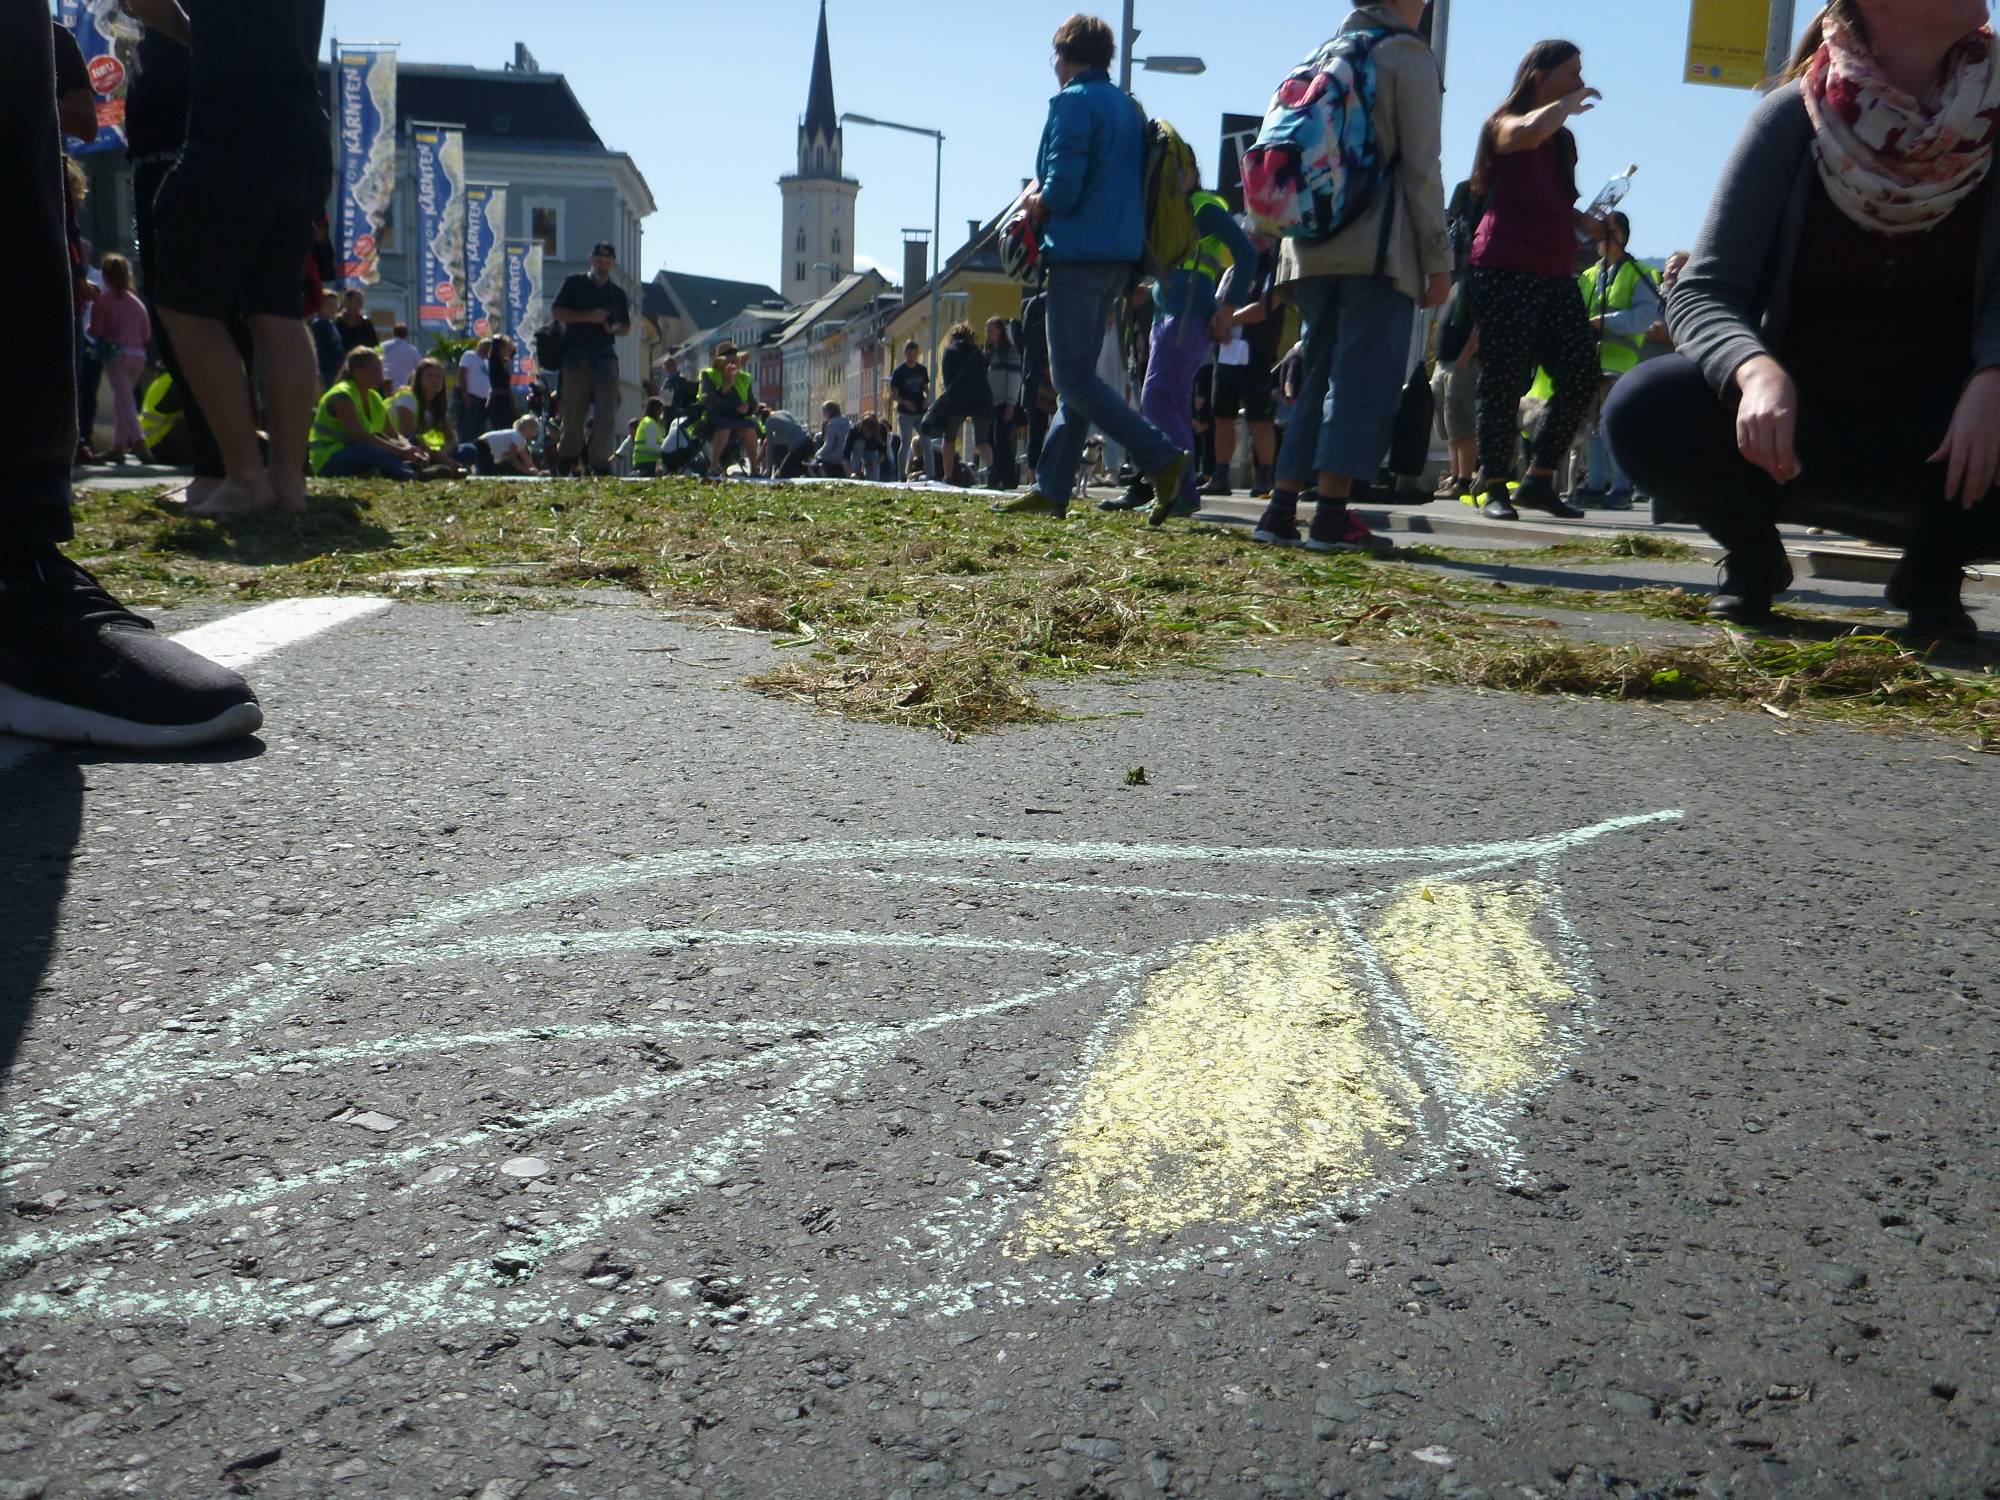 Fridays for Future on 2019-09-20 in Villach, Carinthia, Photo #6